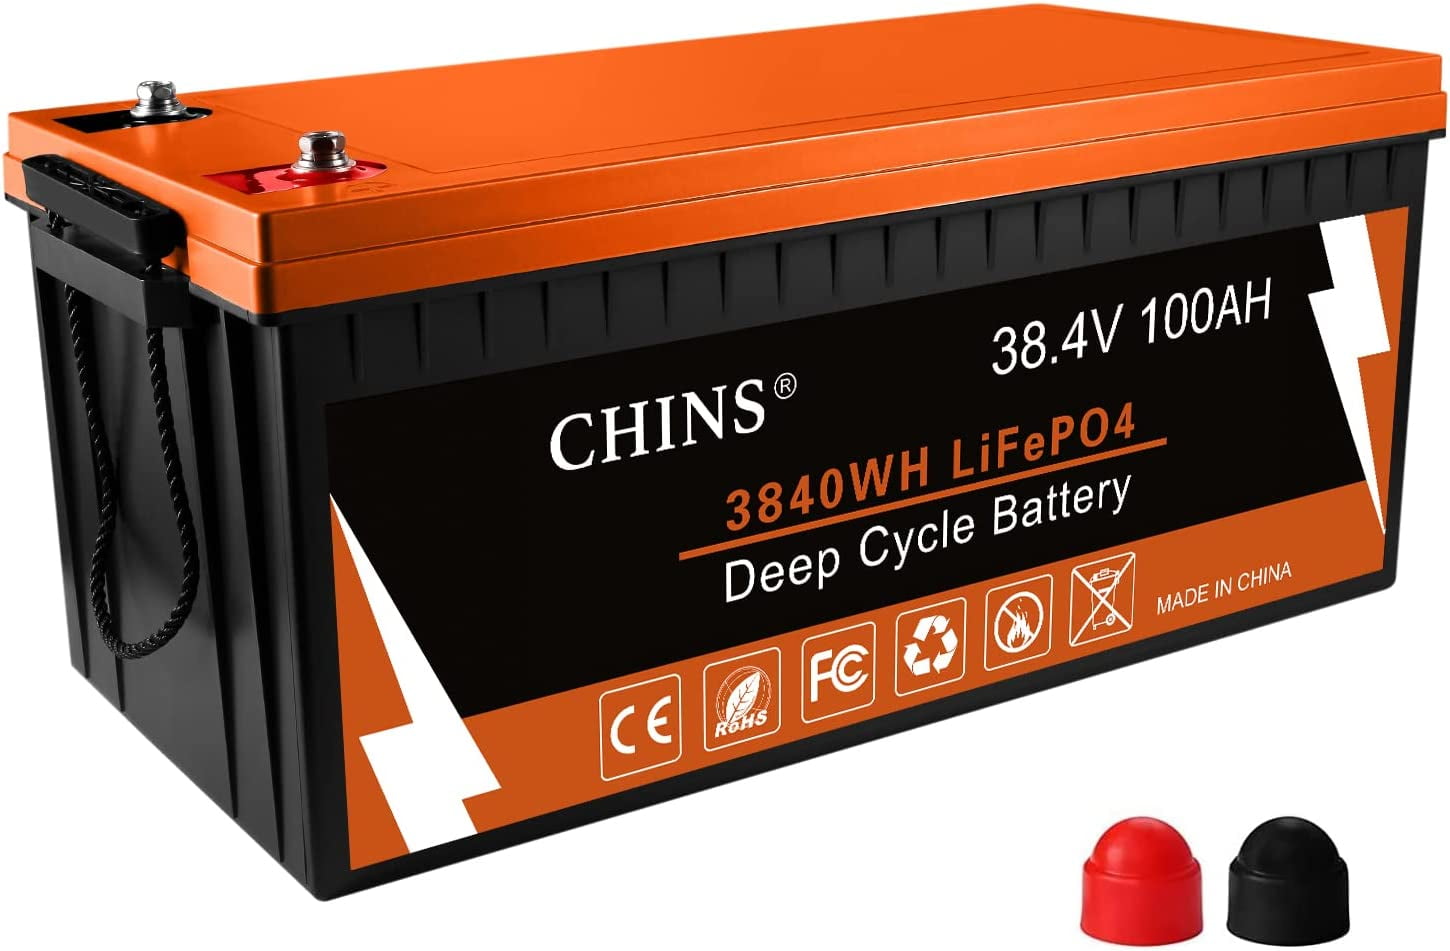 CHINS Bluetooth LiFePO4 Smart 36V 100AH Lithium Iron Battery for Golf Carts